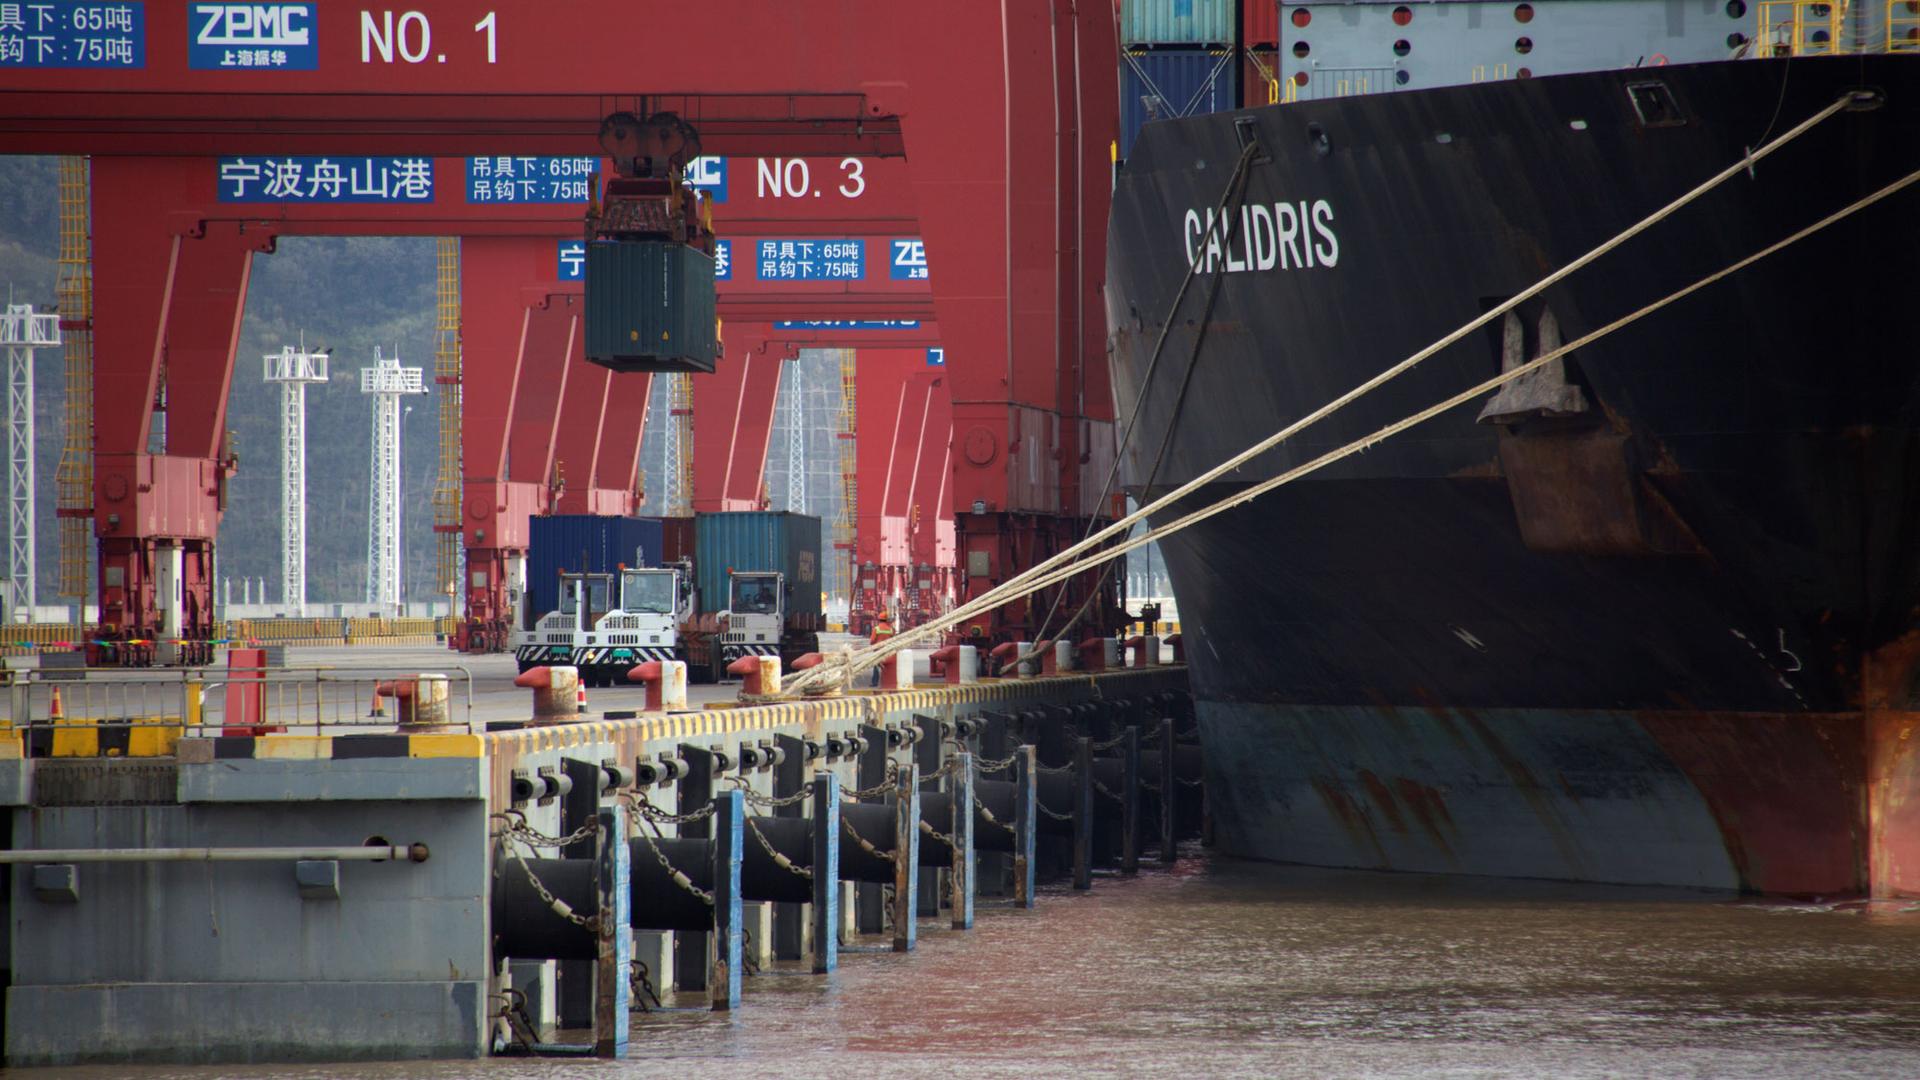 Trucks transport containers are shown being moved from trucks to a container ship at a port in China.